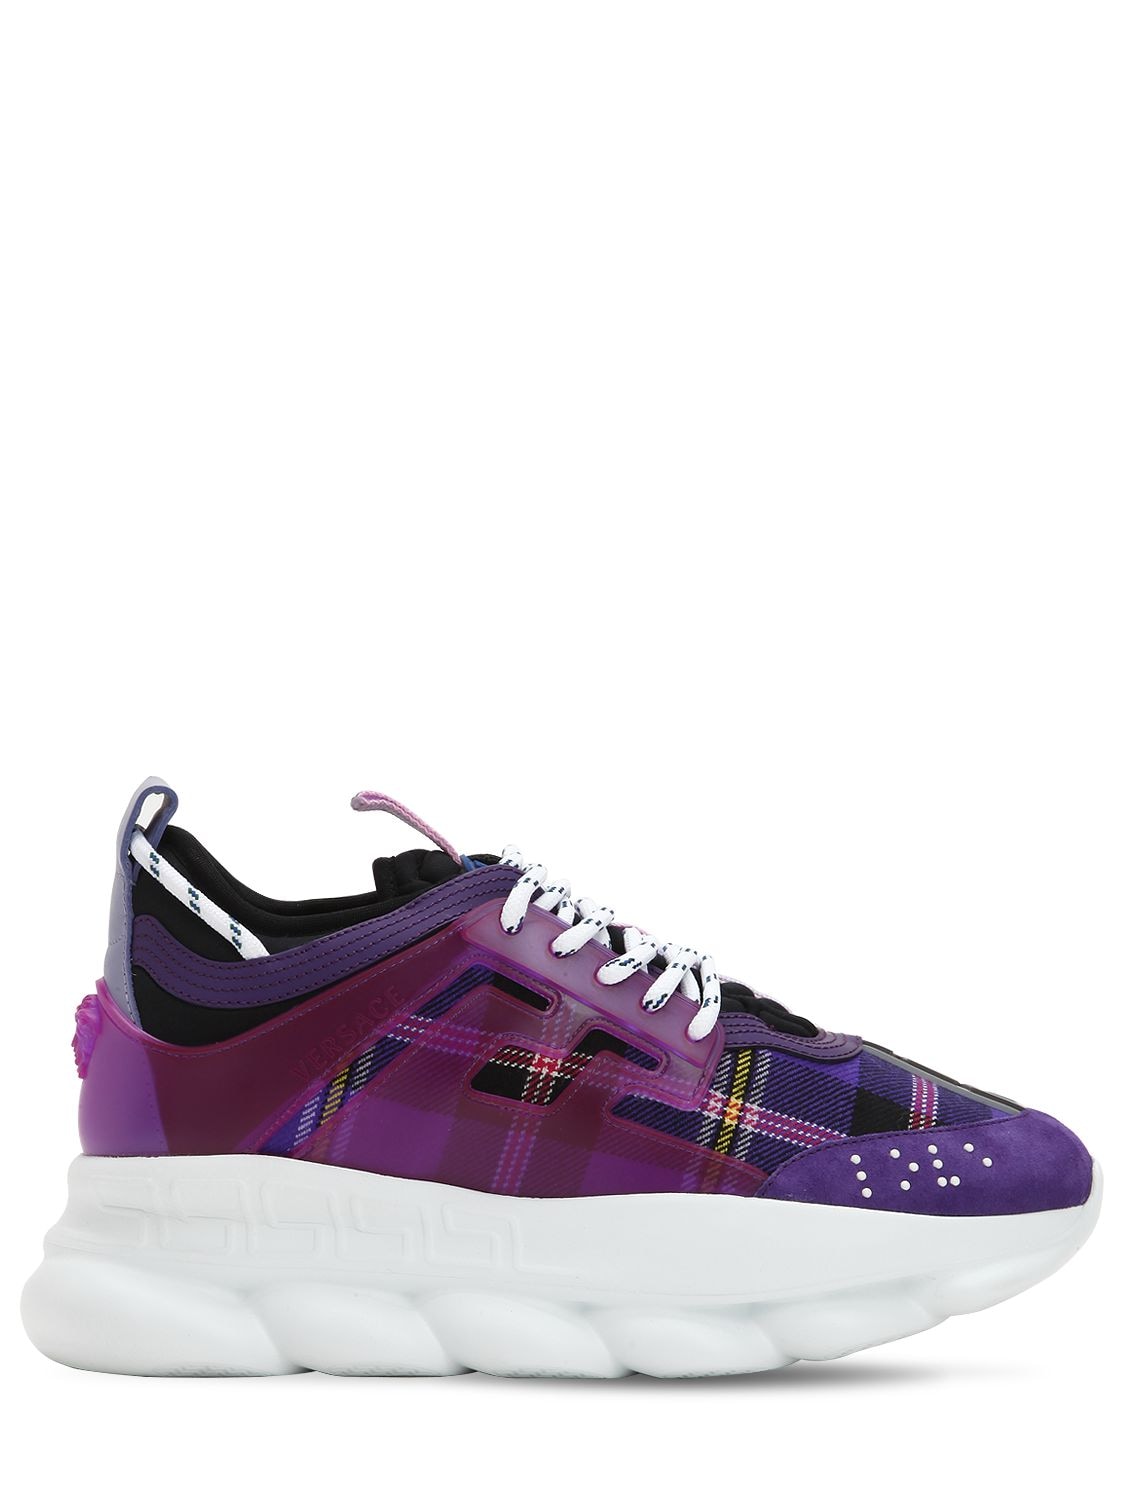 VERSACE CHAIN REACTION WOOL PLAID trainers,68IM7E005-RE1DVKW1